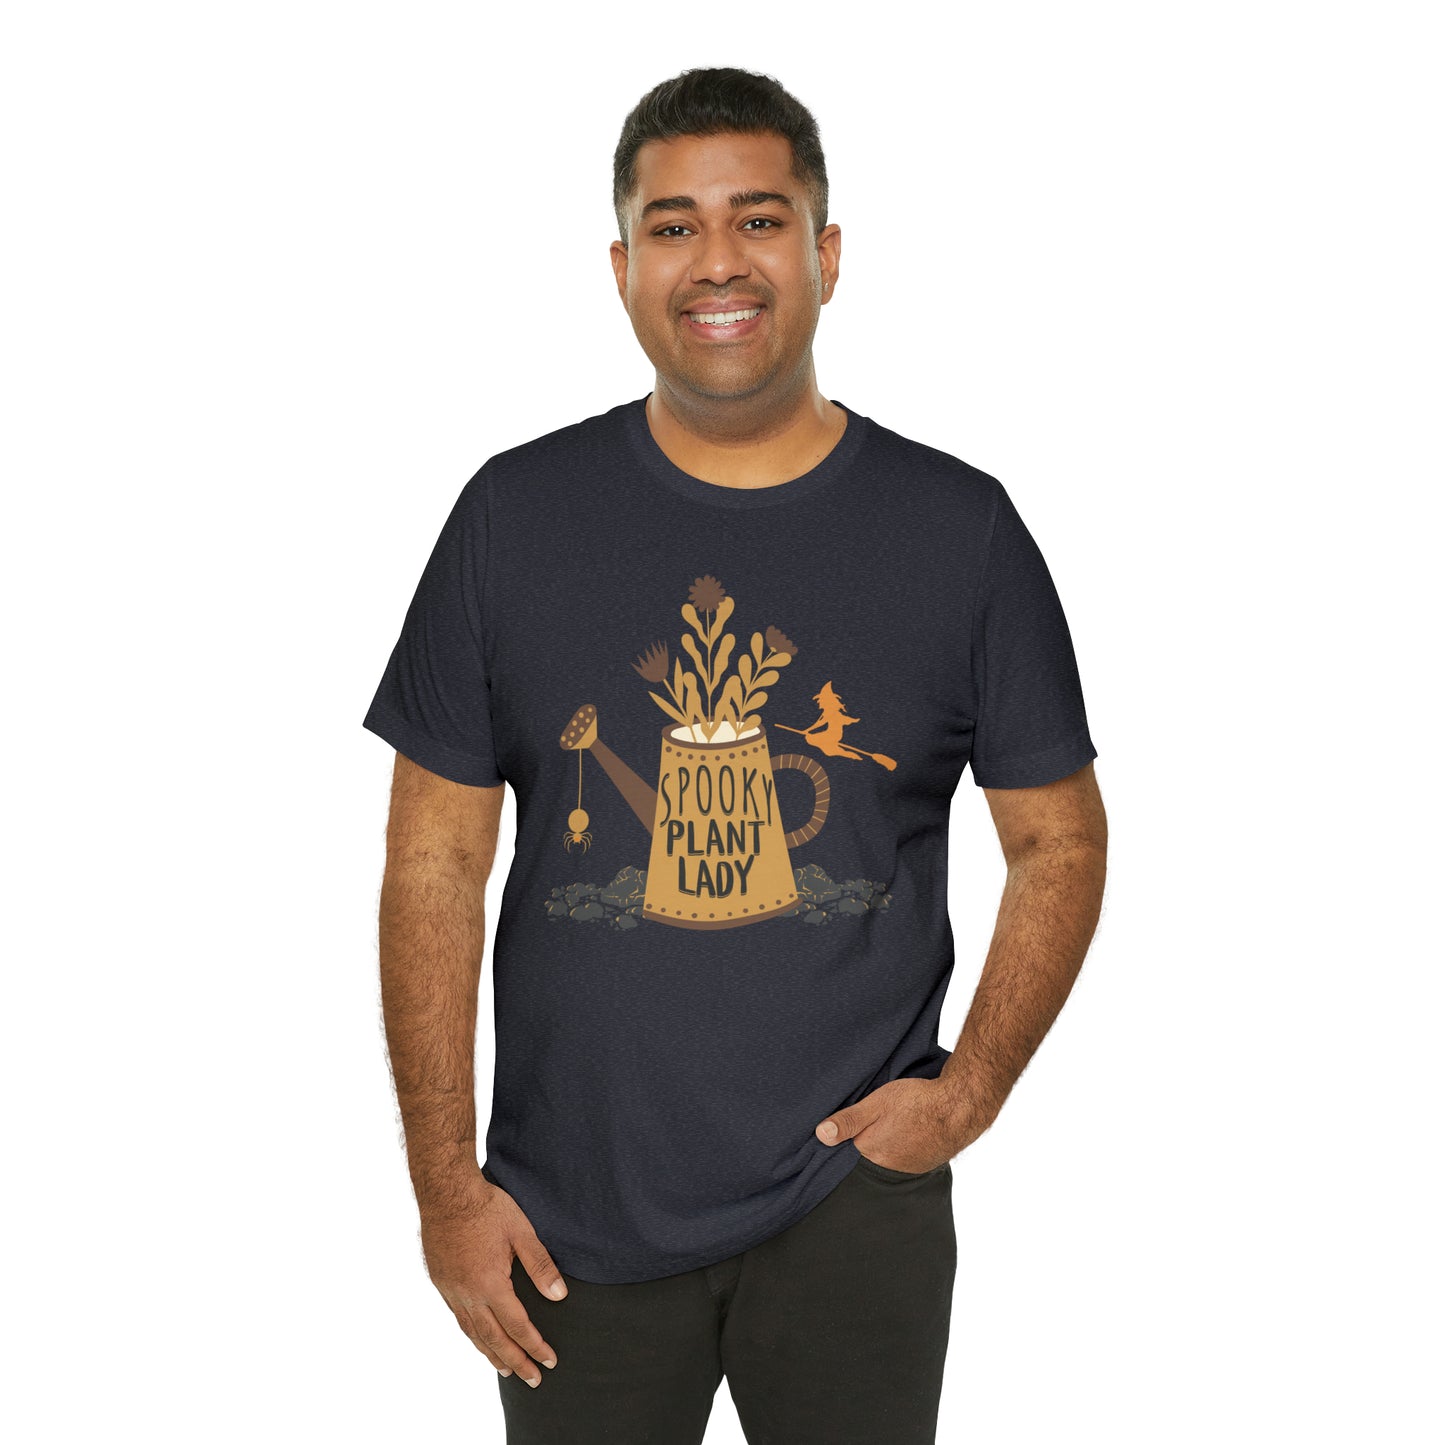 Adult "Spooky Plant Lady" - Plant Lover Unisex Jersey Short Sleeve Tee